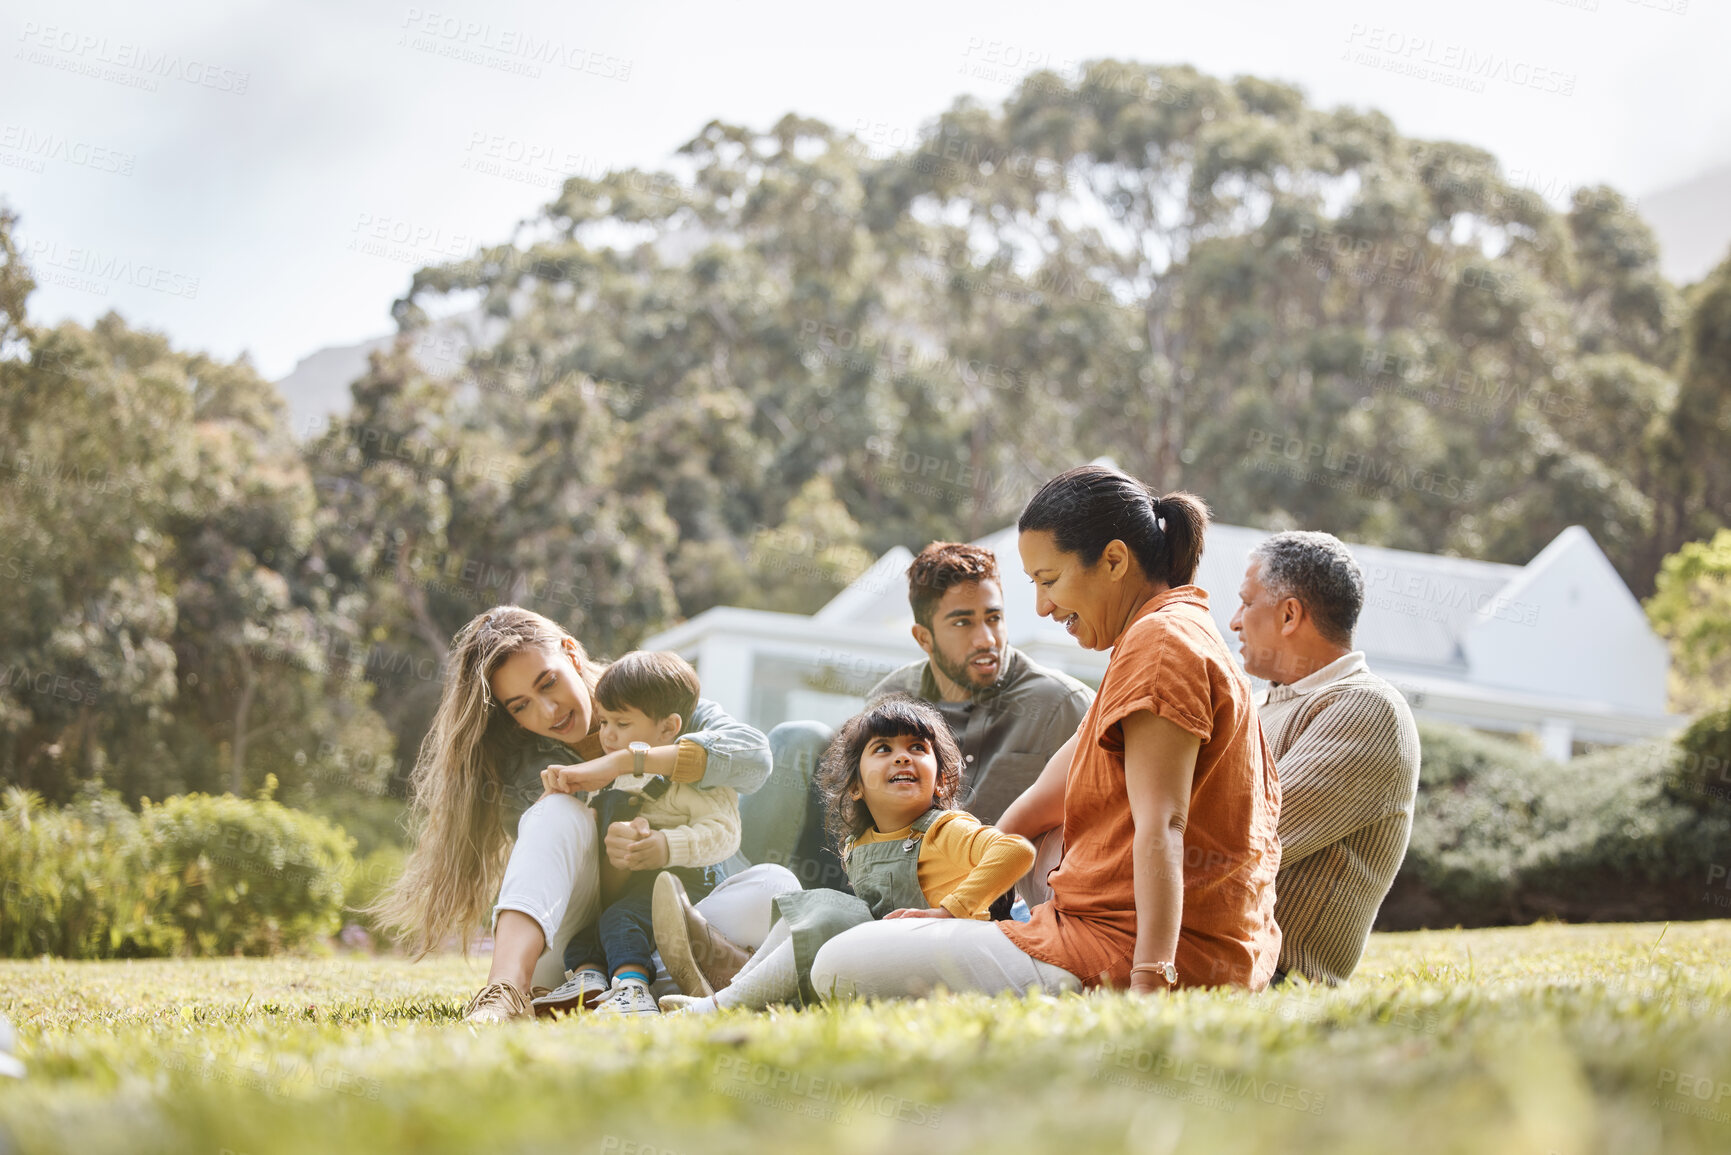 Buy stock photo Happy, big family and garden of new home with love, support and grandparents with parents and kids. Backyard, smile and moving of mother, father and children together with bonding outdoor and field